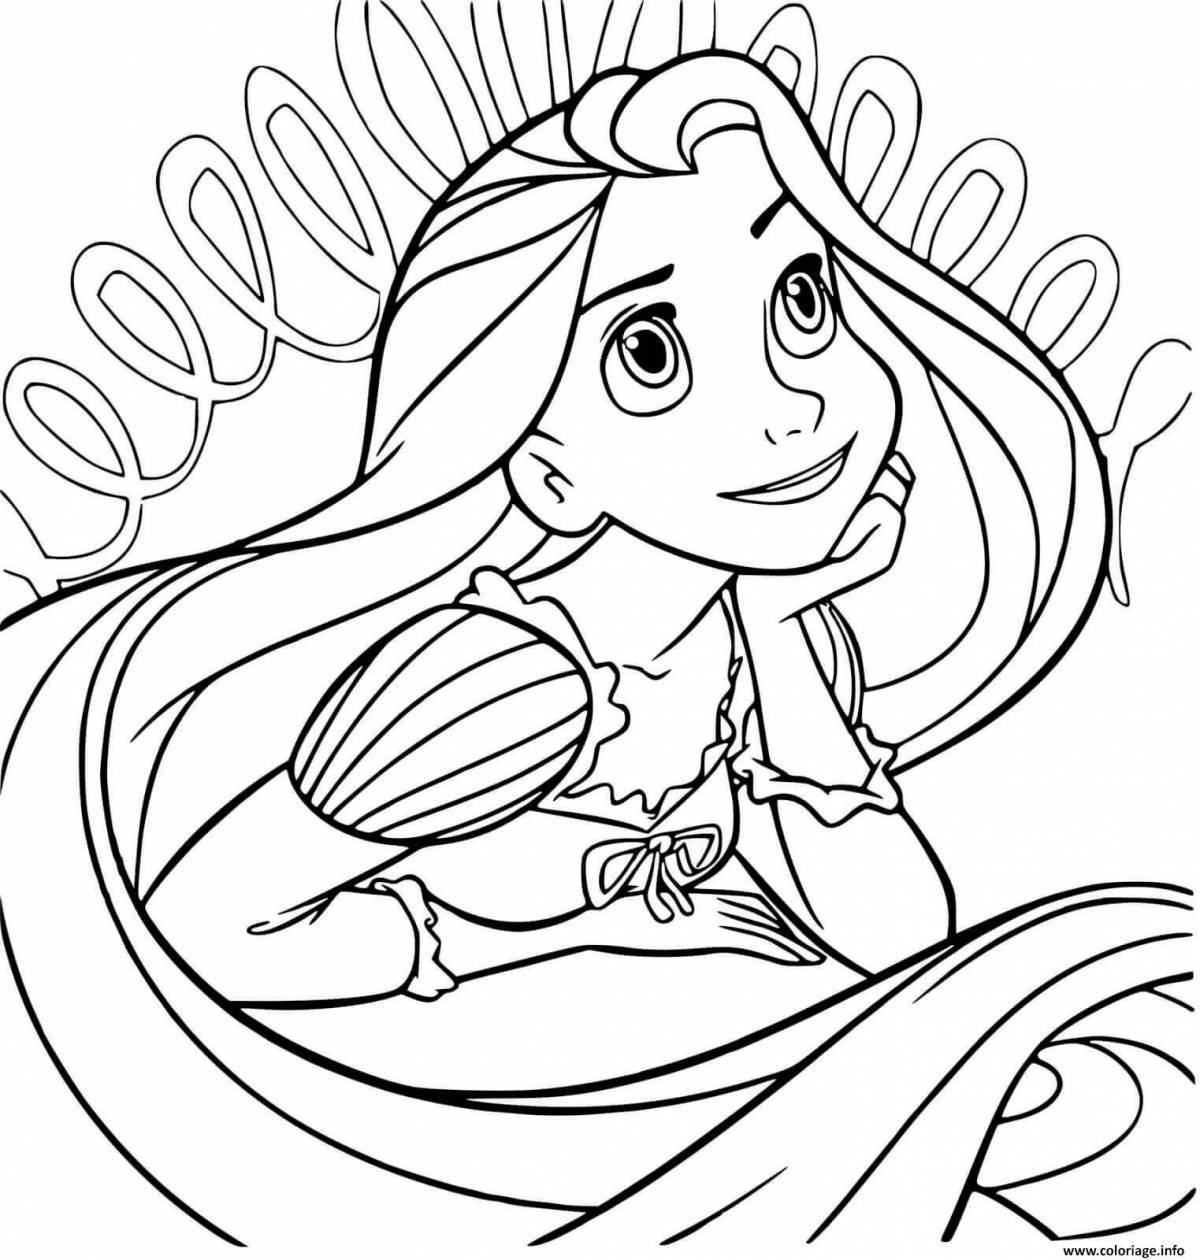 Colorful rampoelzel coloring page